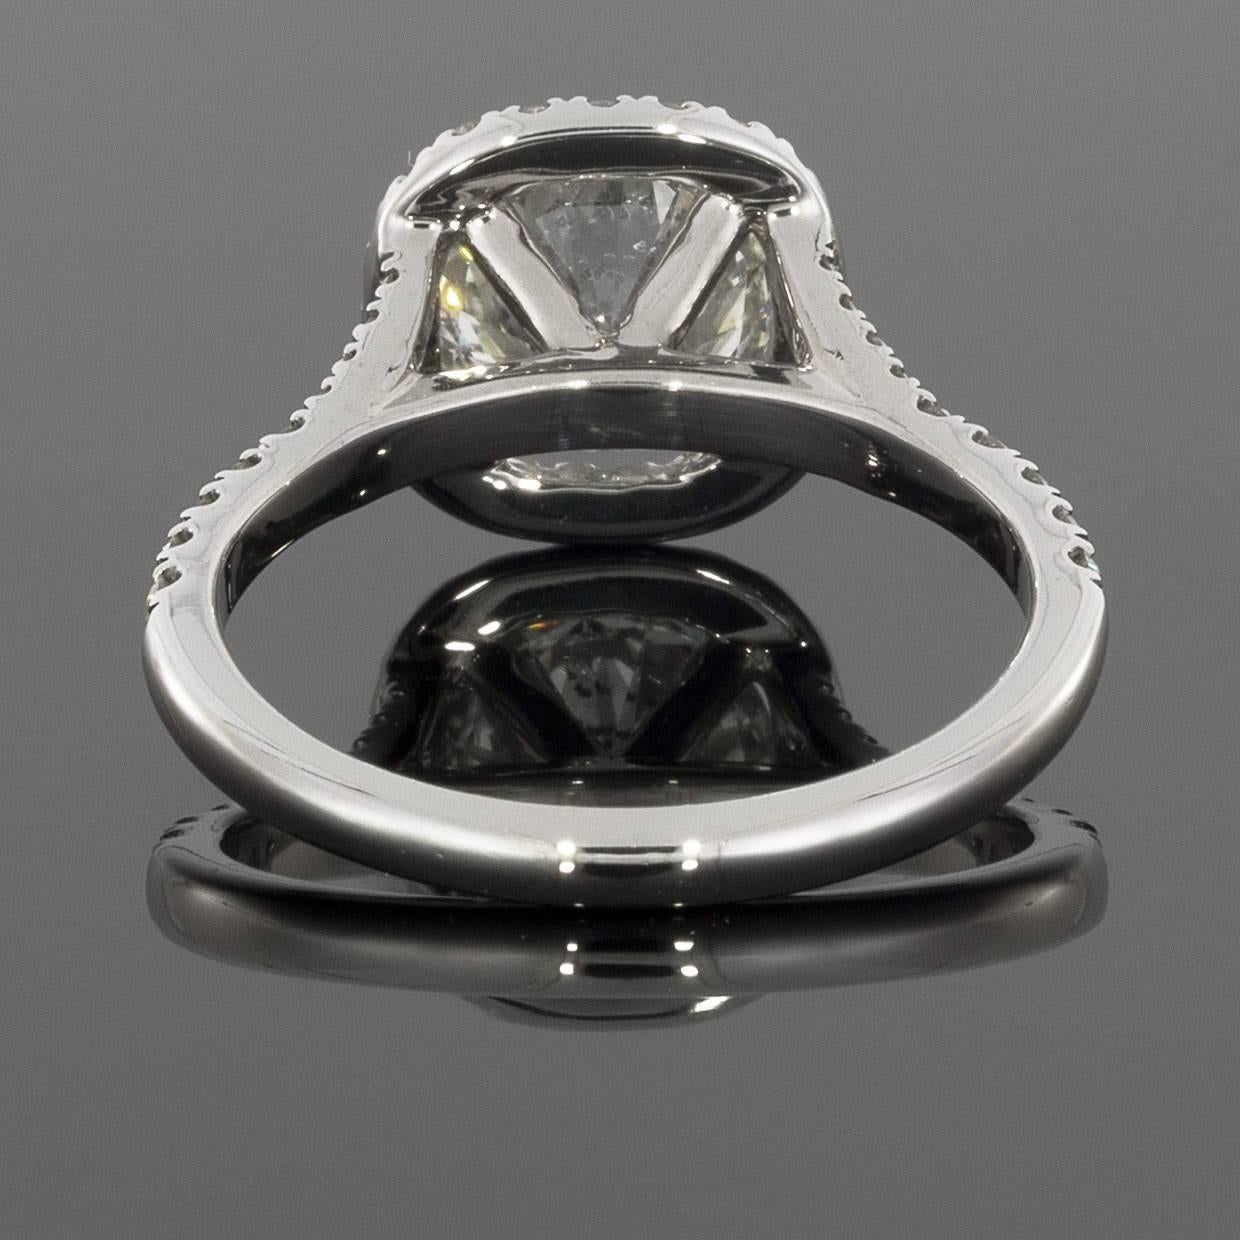 This beautiful diamond engagement ring features round brilliant diamonds with a 1.94 carat total weight. The center diamond is a 1.56 carat round diamond that grades as J/SI2 in quality. It is prong set in a 14 karat white gold setting. The diamonds